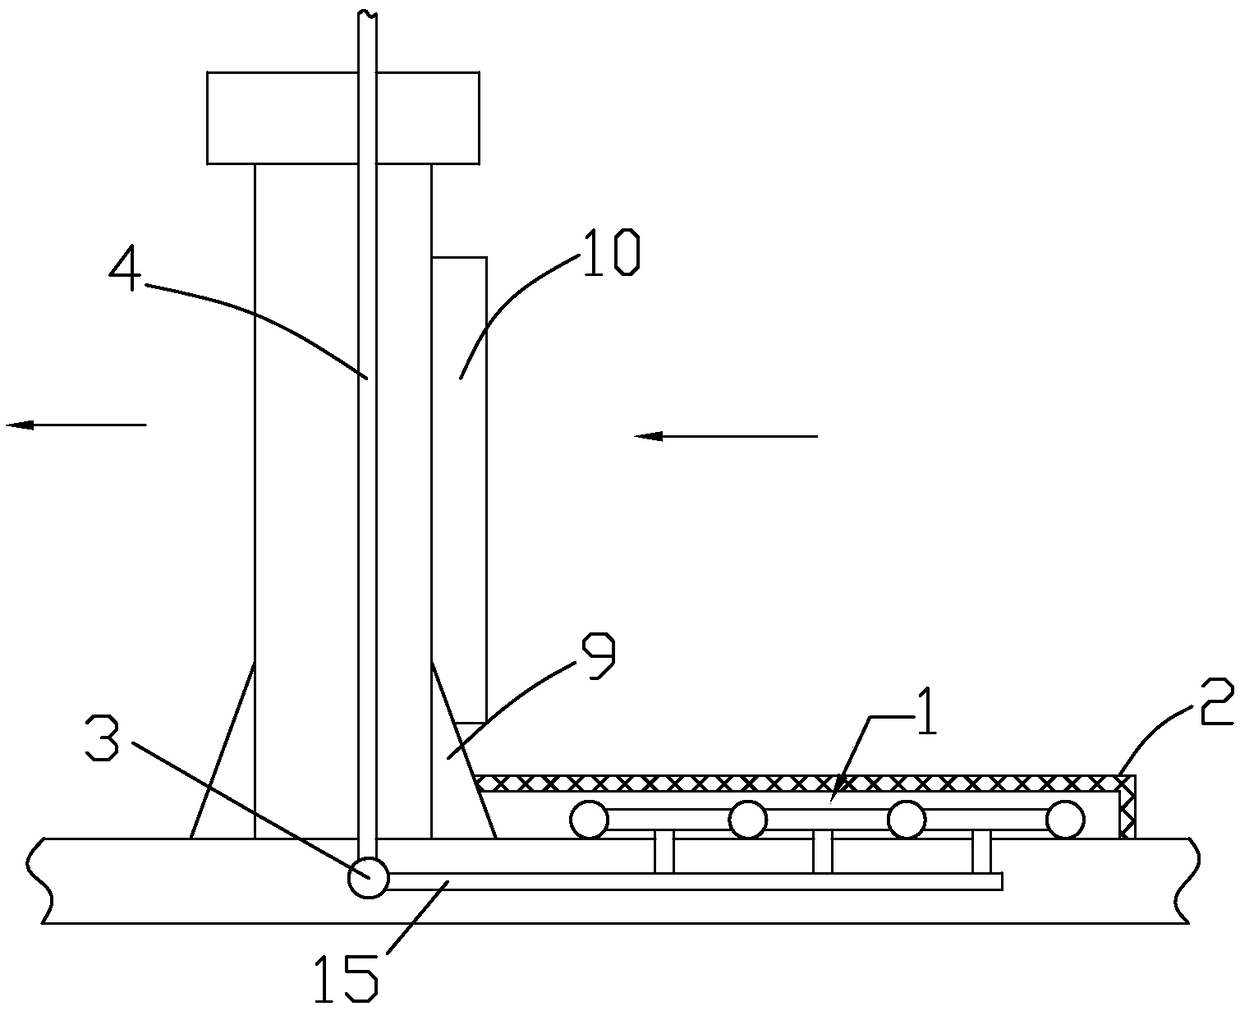 River silt cleaning device and construction method